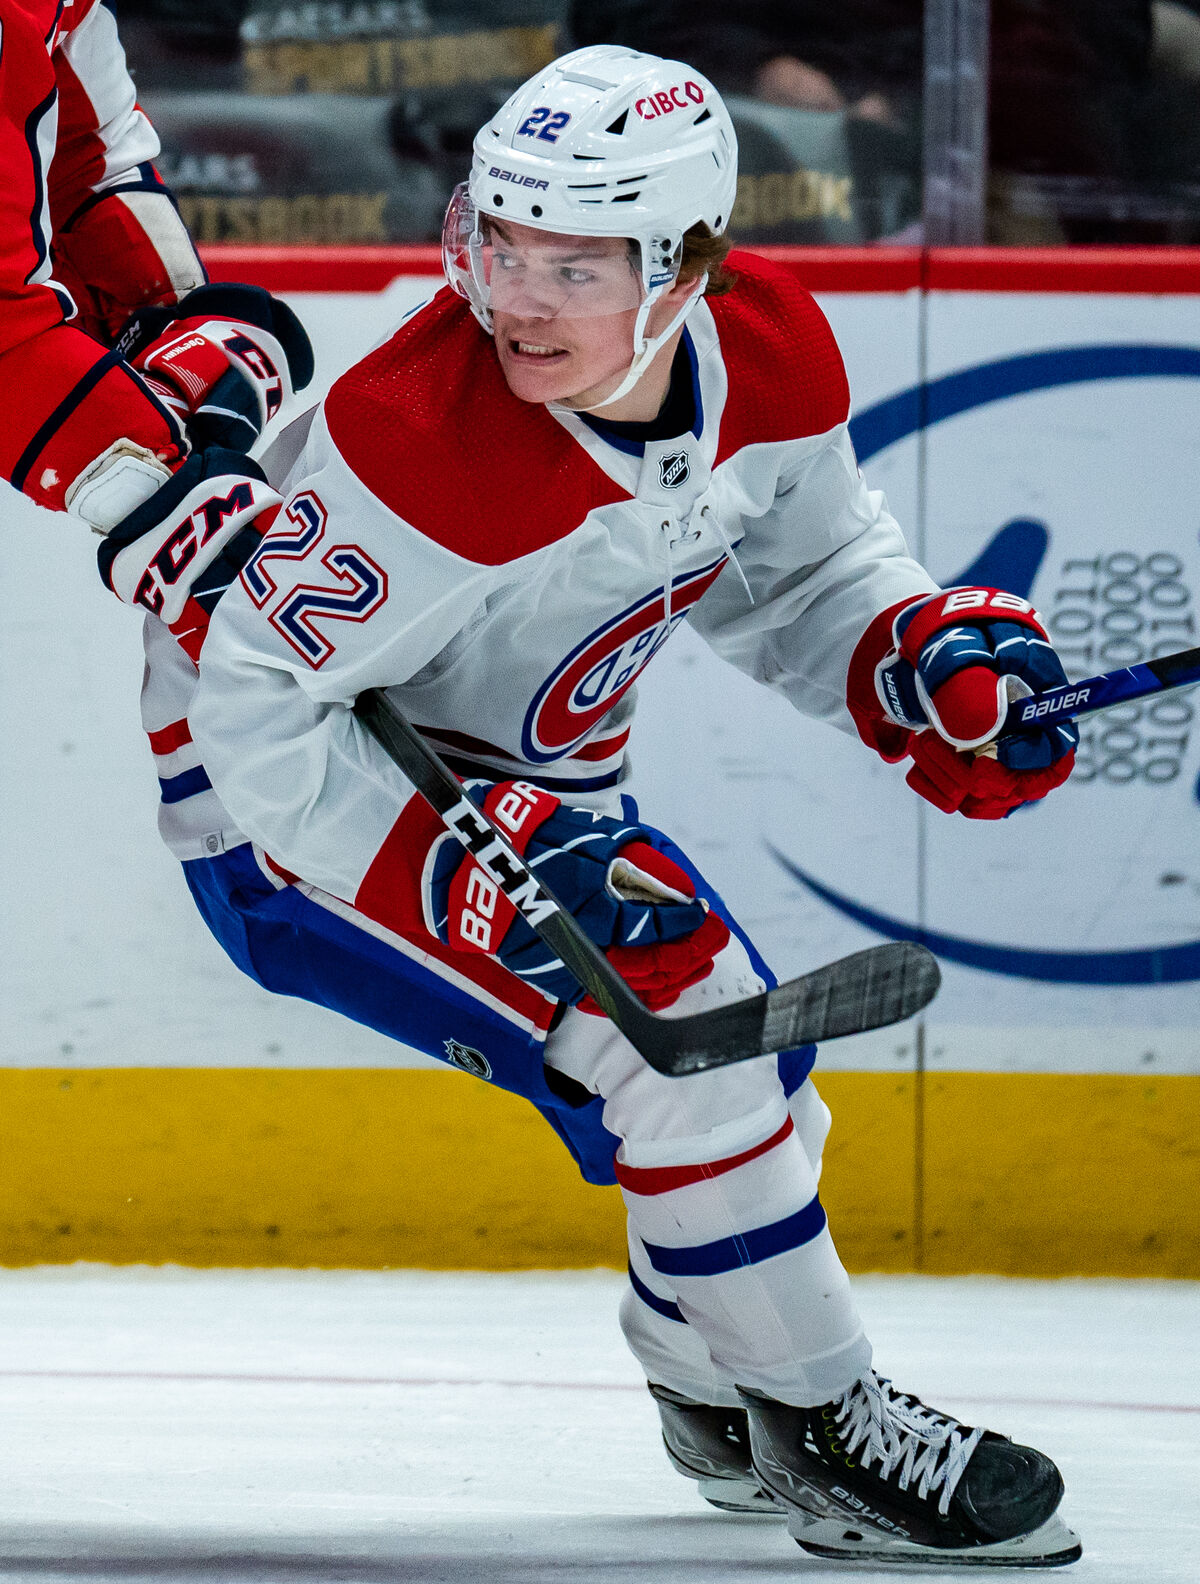 Complete Hockey News - Montreal Canadiens forward Cole Caufield has been  named NHL Rookie of the Month for March 2022!